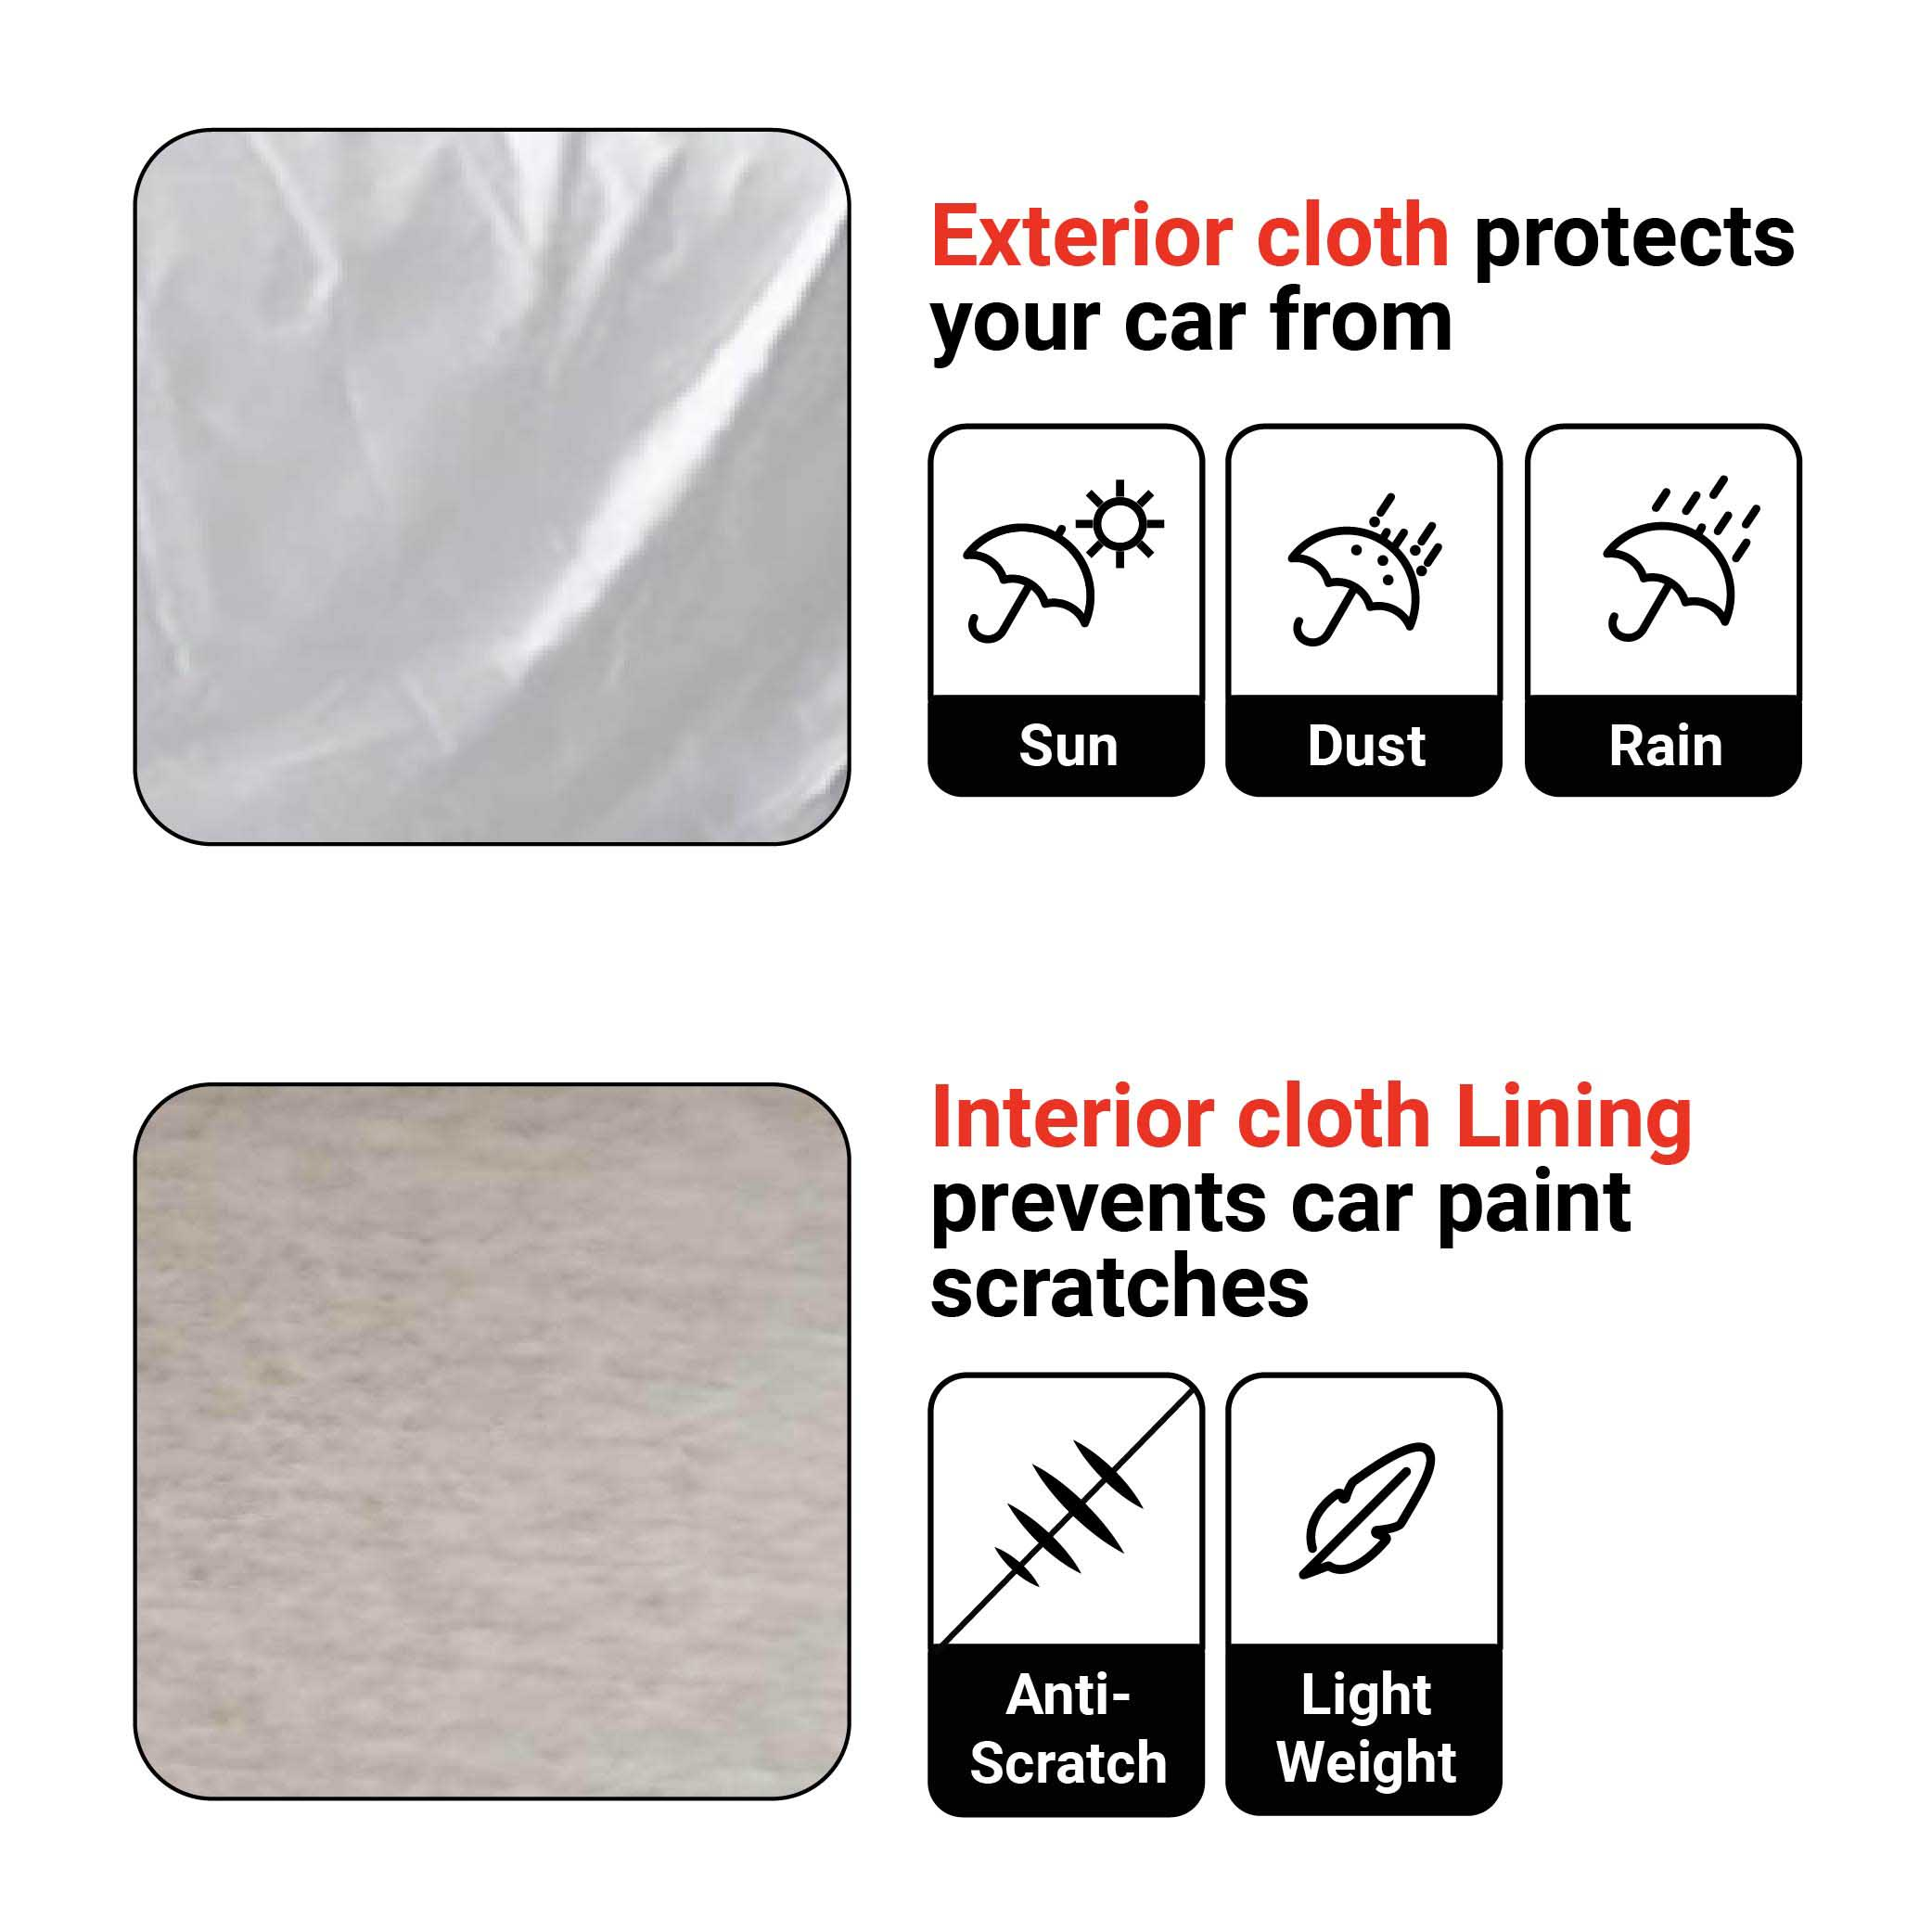 Polco Maruti Suzuki New Swift Car Body Cover with Antenna Cover, Mirror Pockets and 100% Water Repellent (Dupont Tyvek)